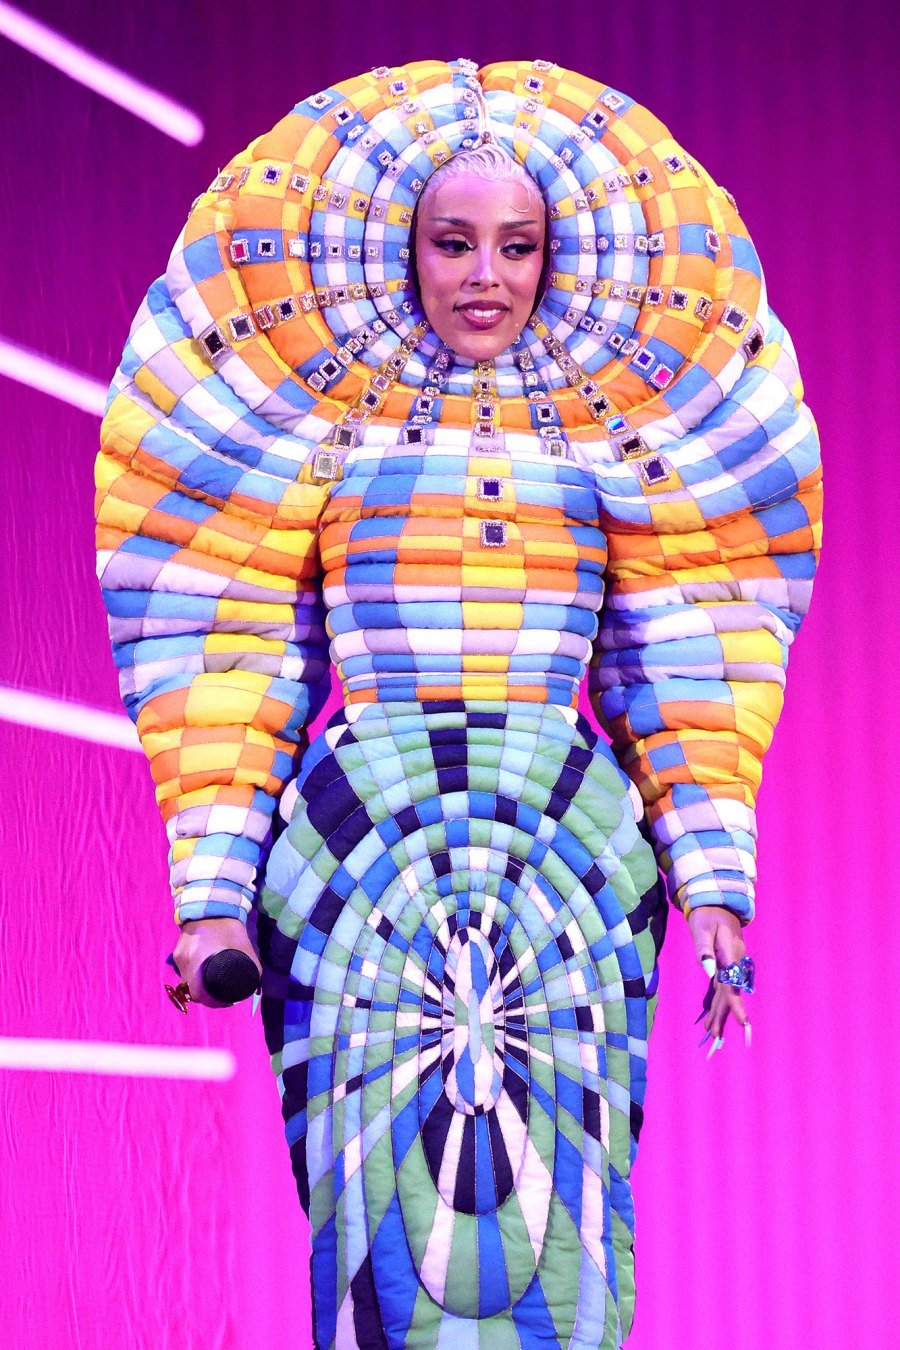 VMAs 2021: See Doja Cat’s Wildest Awards Show Outfits